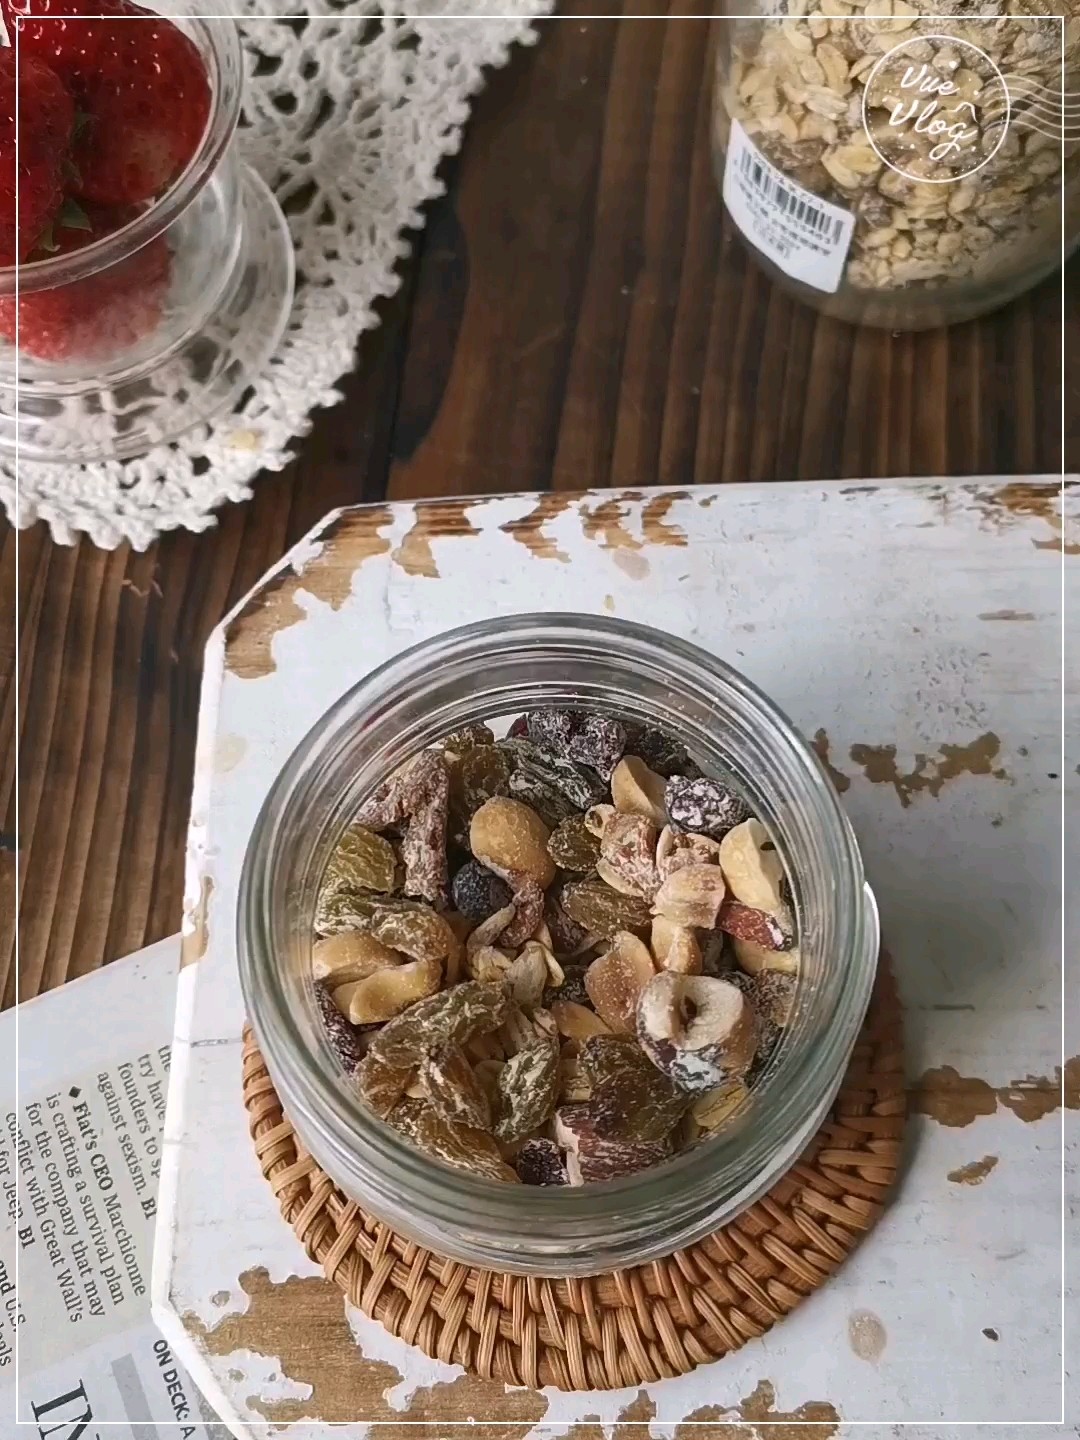 Baked Cereal (flour Version)